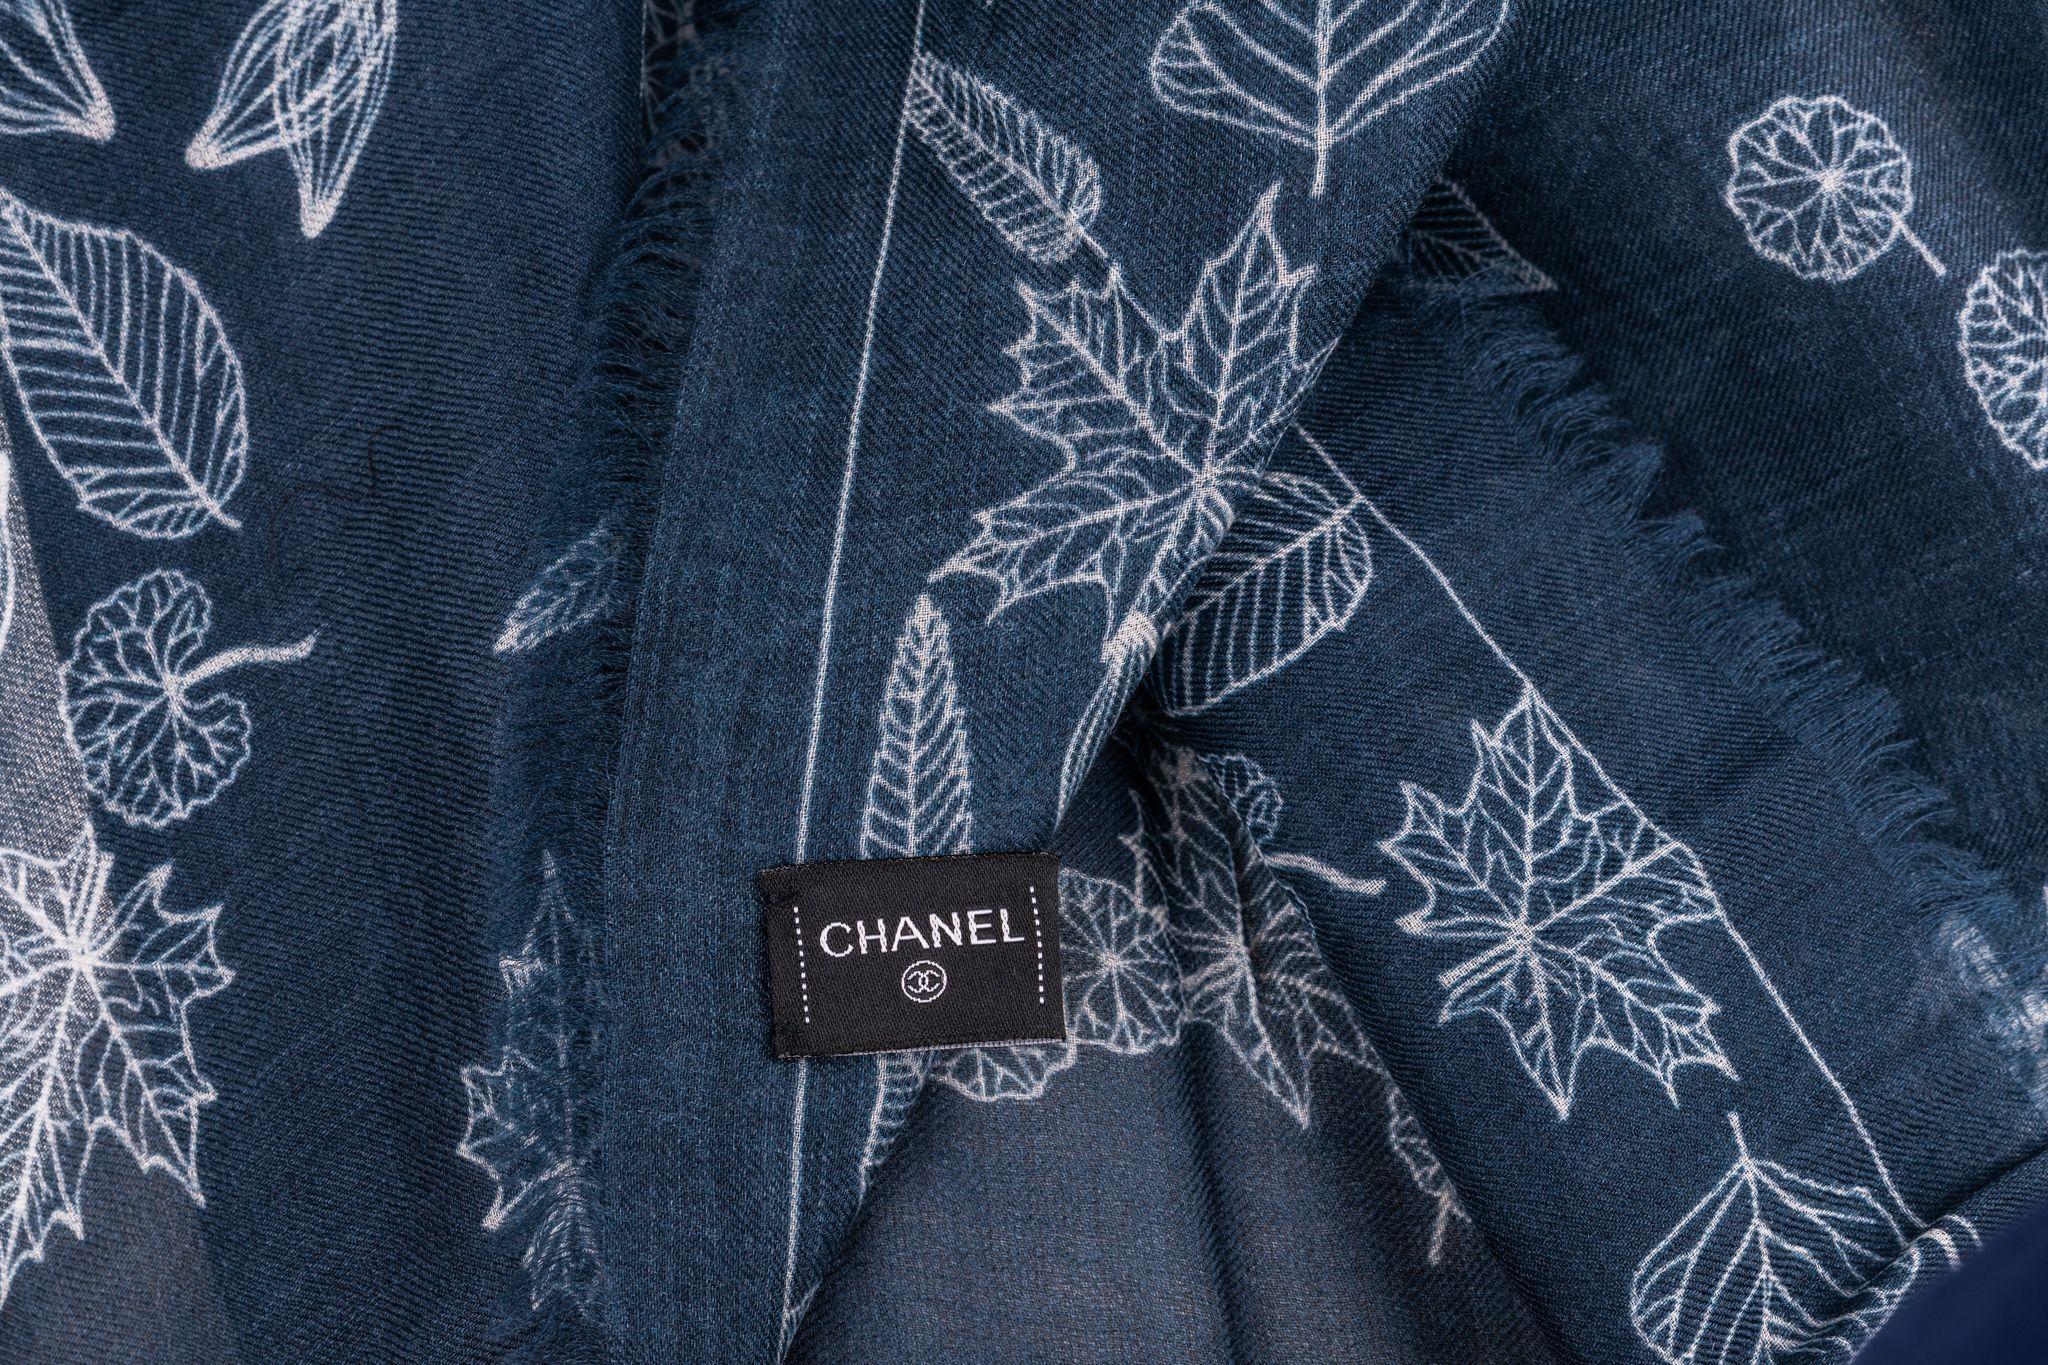 Chanel Cashmere Shawl in navy with a big CC logo in the center. The logo is designed with leaves so is the frame of the scarf. The item is in new condition.